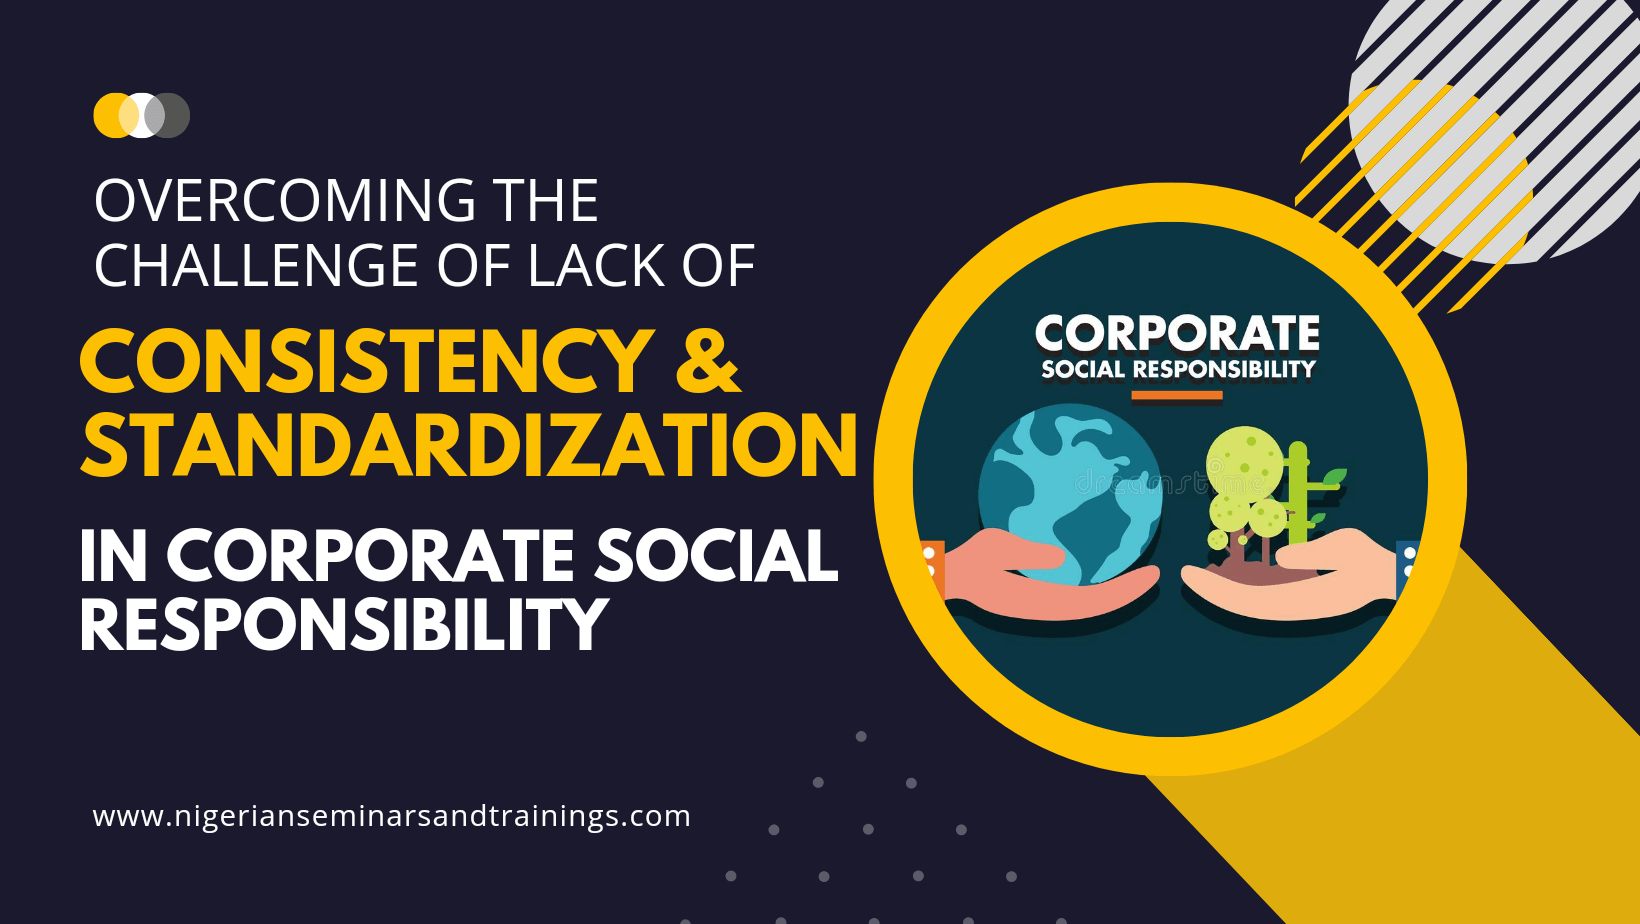 Overcoming Inconsistency and lack of Standardization in Corporate Social Responsibility (CSR) 